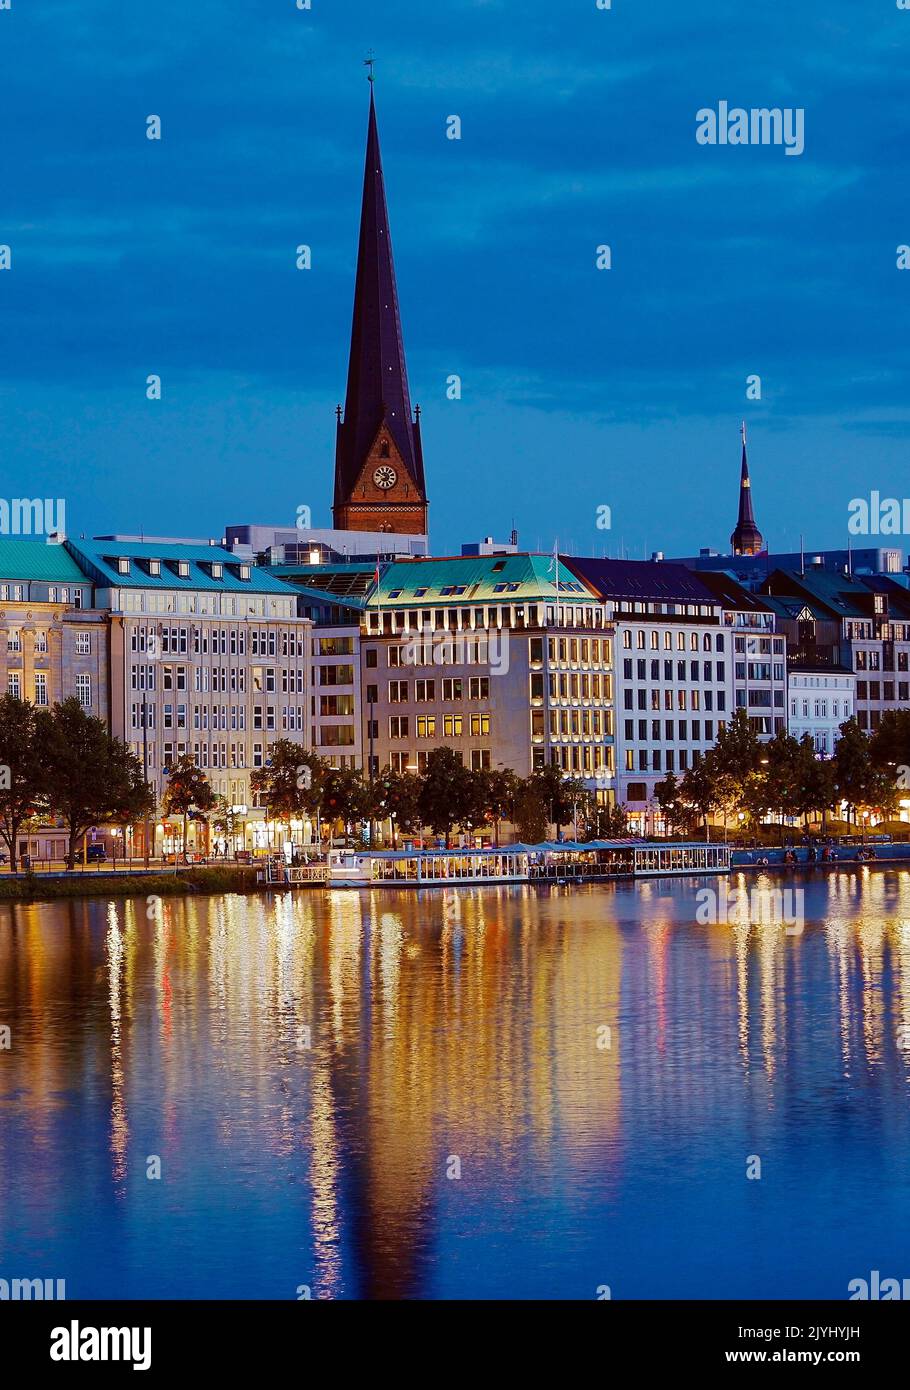 Inner Alster Lake with Saint Peter's Church in the evening, Germany, Hamburg Stock Photo